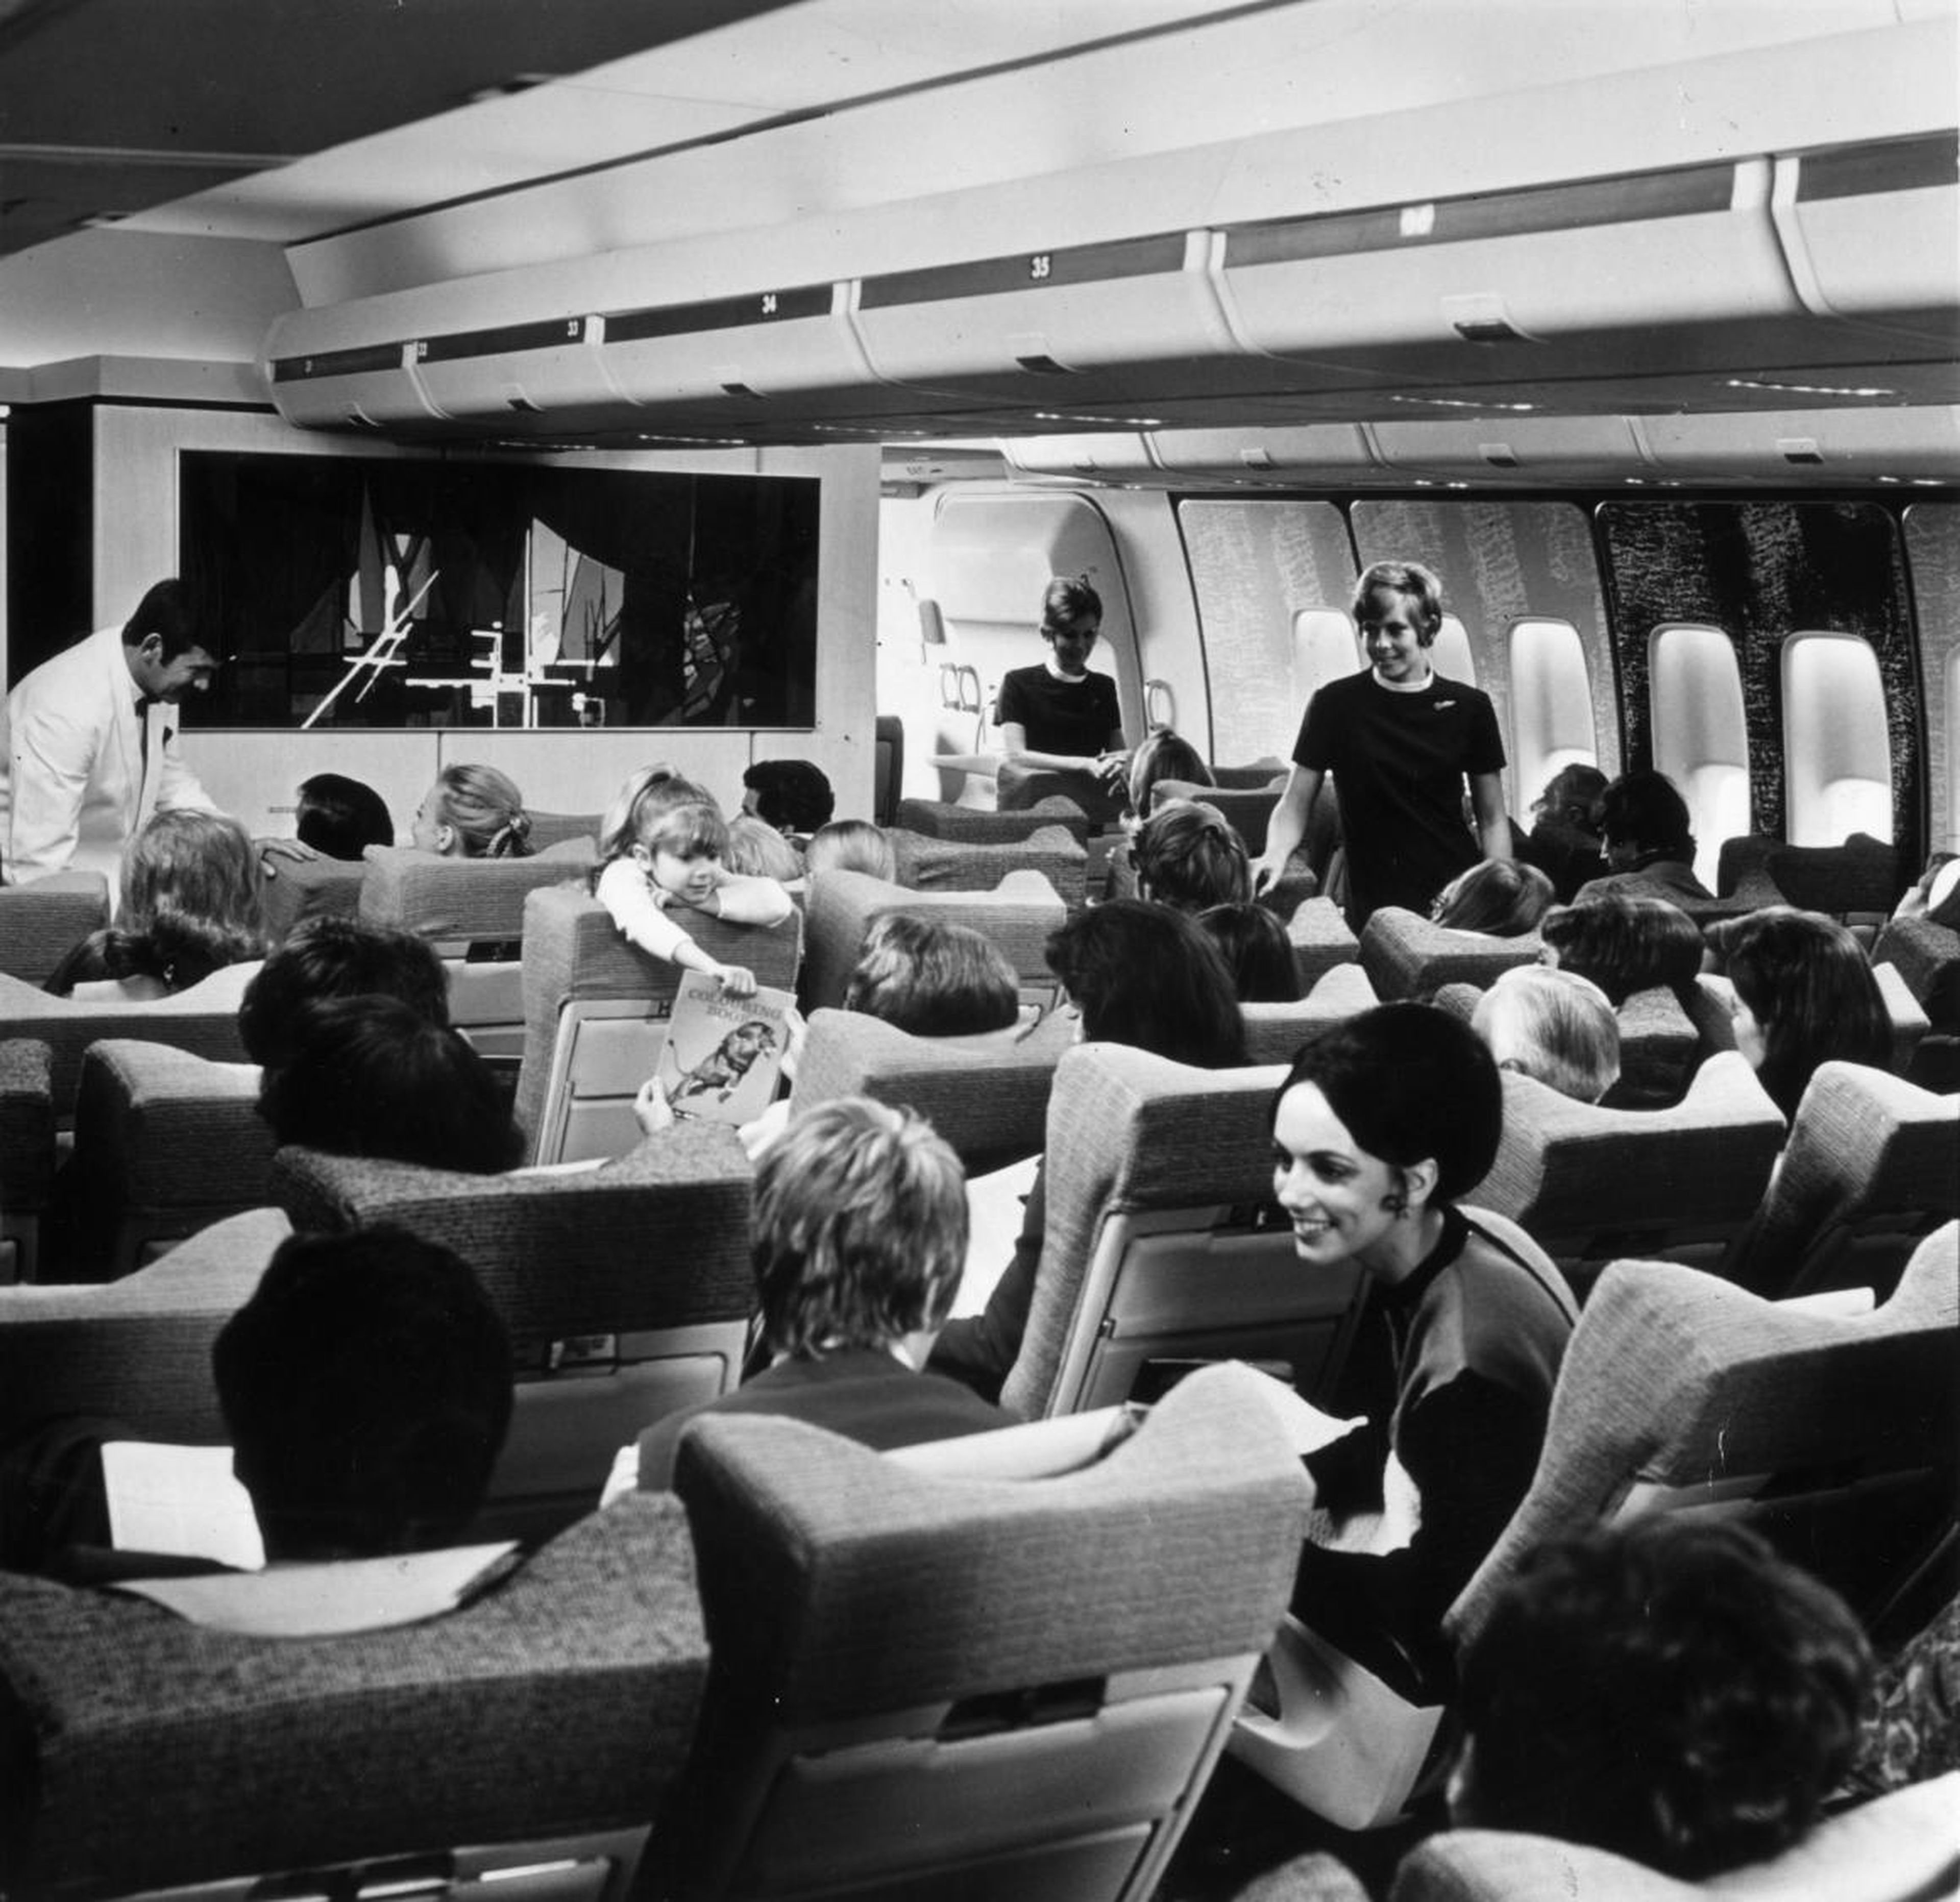 The widebodies delivered an economy-class experience, unlike anything that had come before.